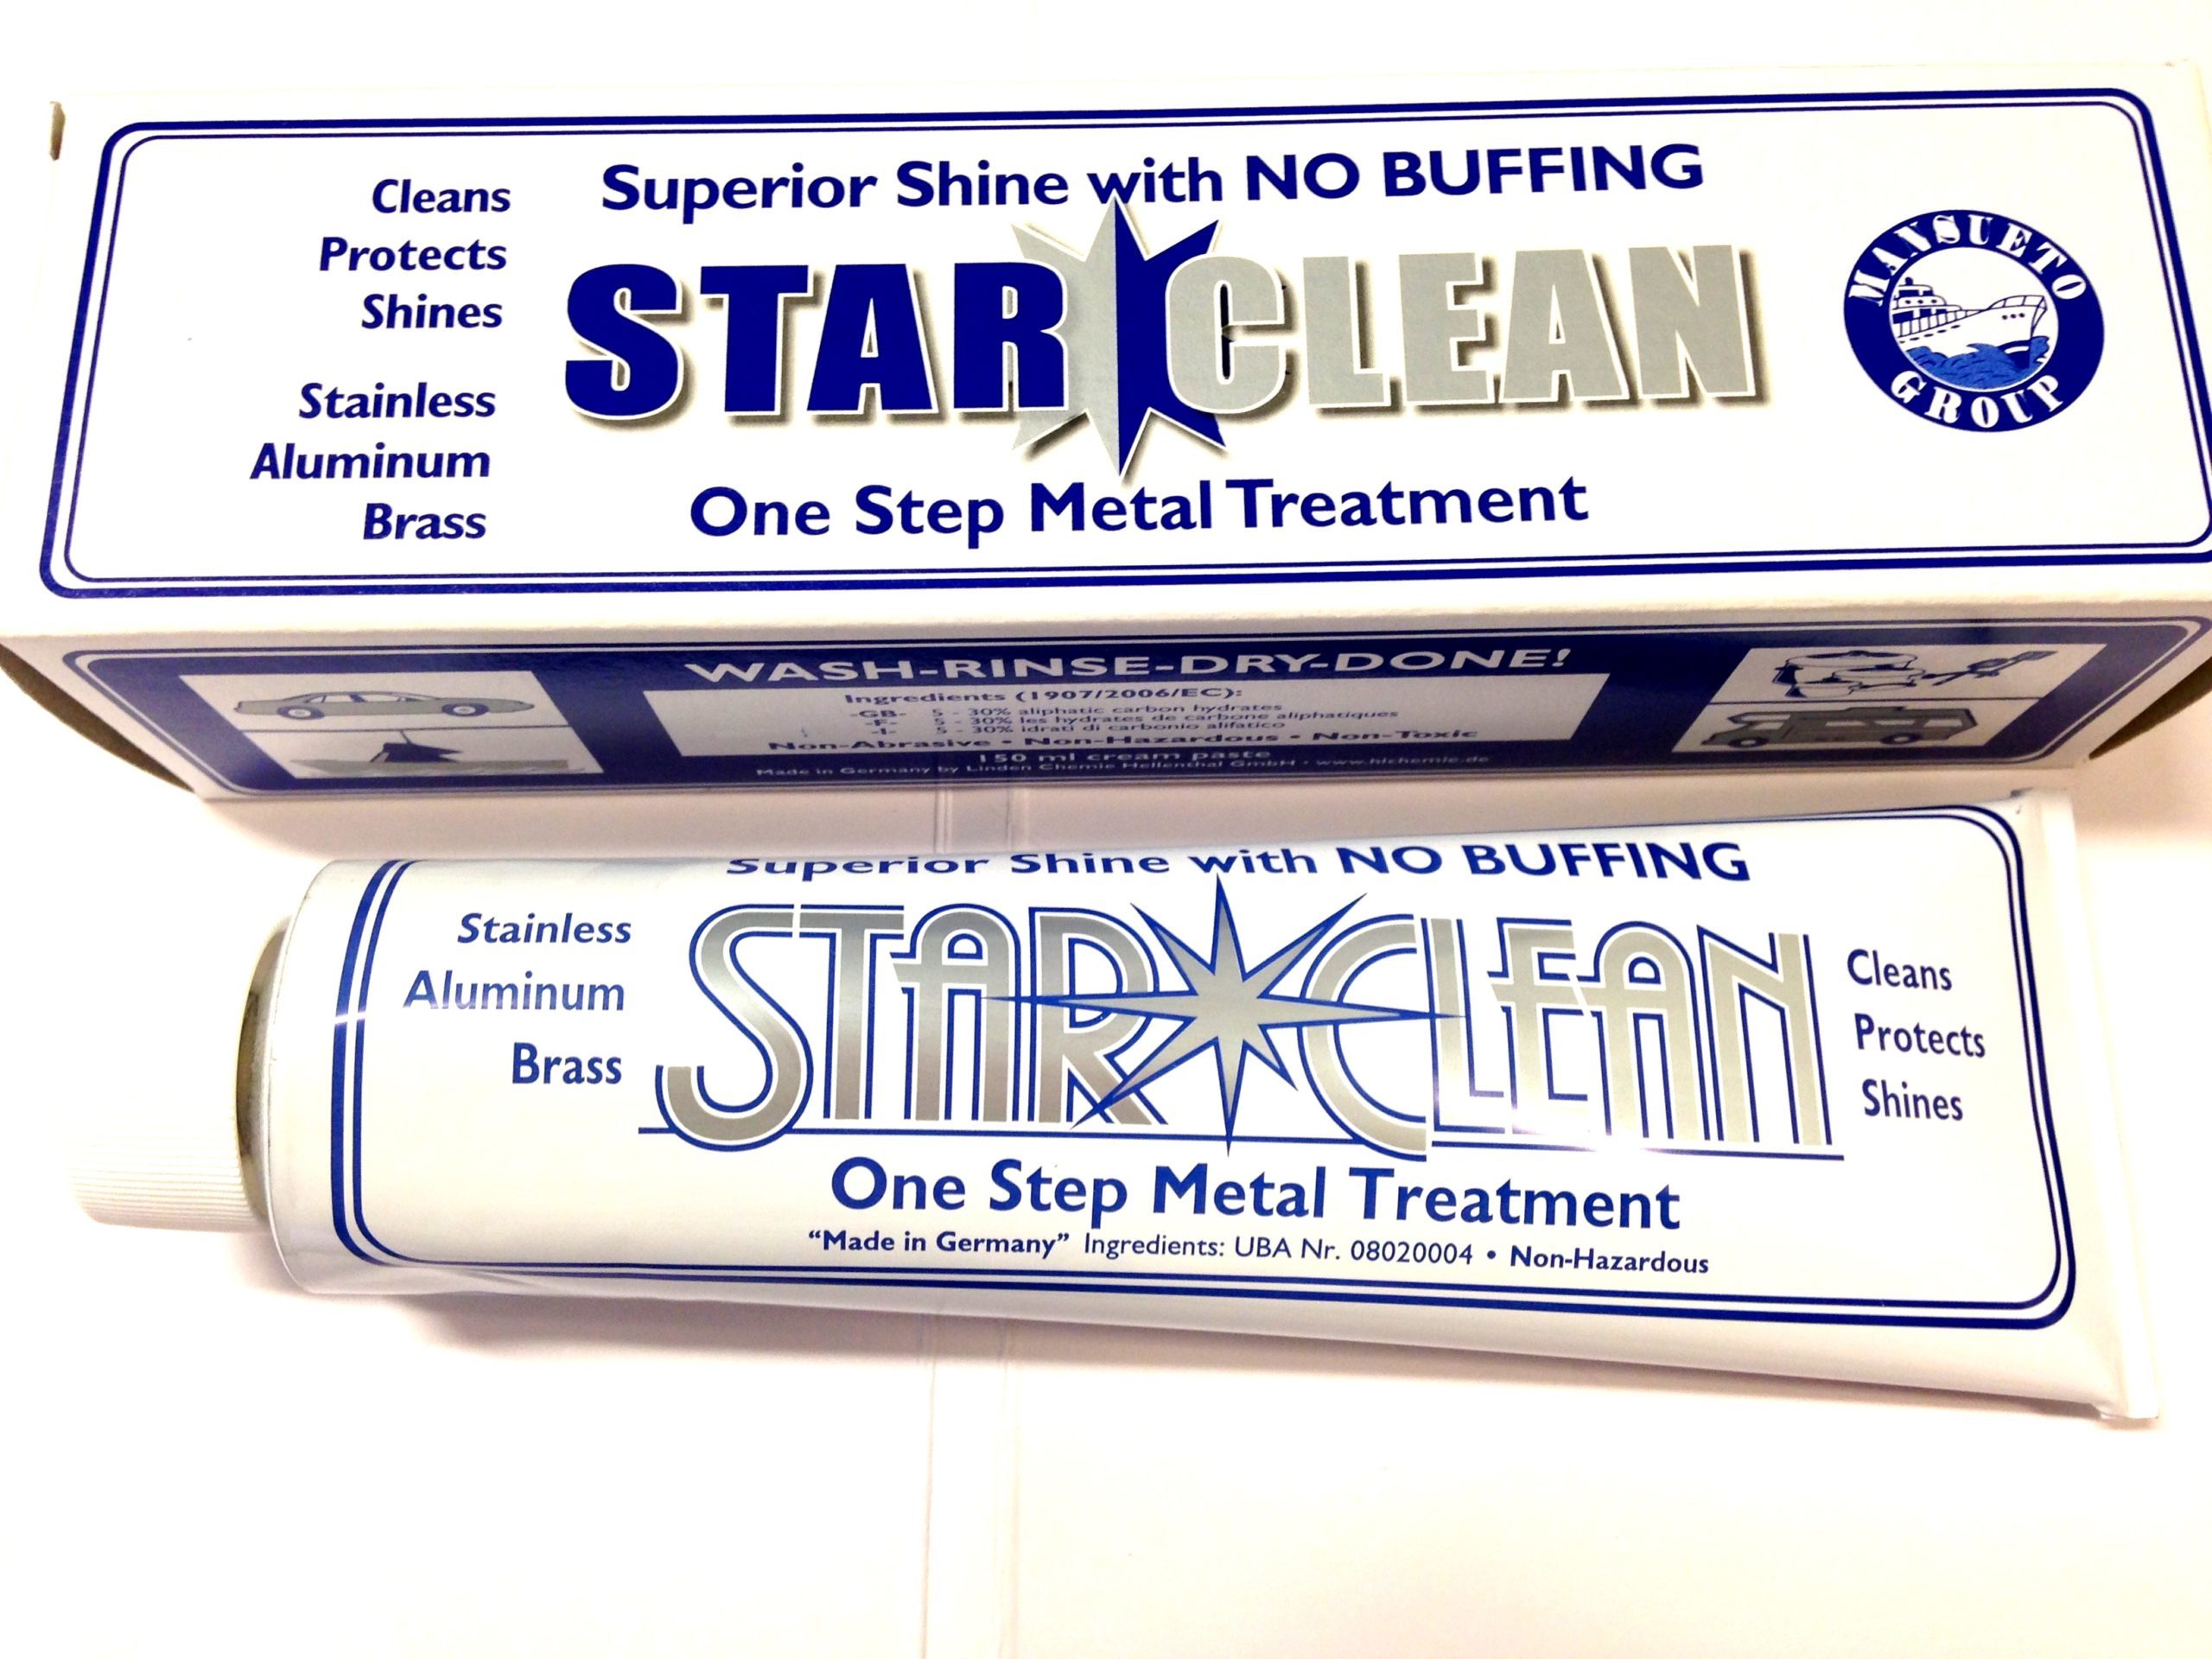 Star Clean - Products and supplies for yatchs, superyatchs, shipyards and boats